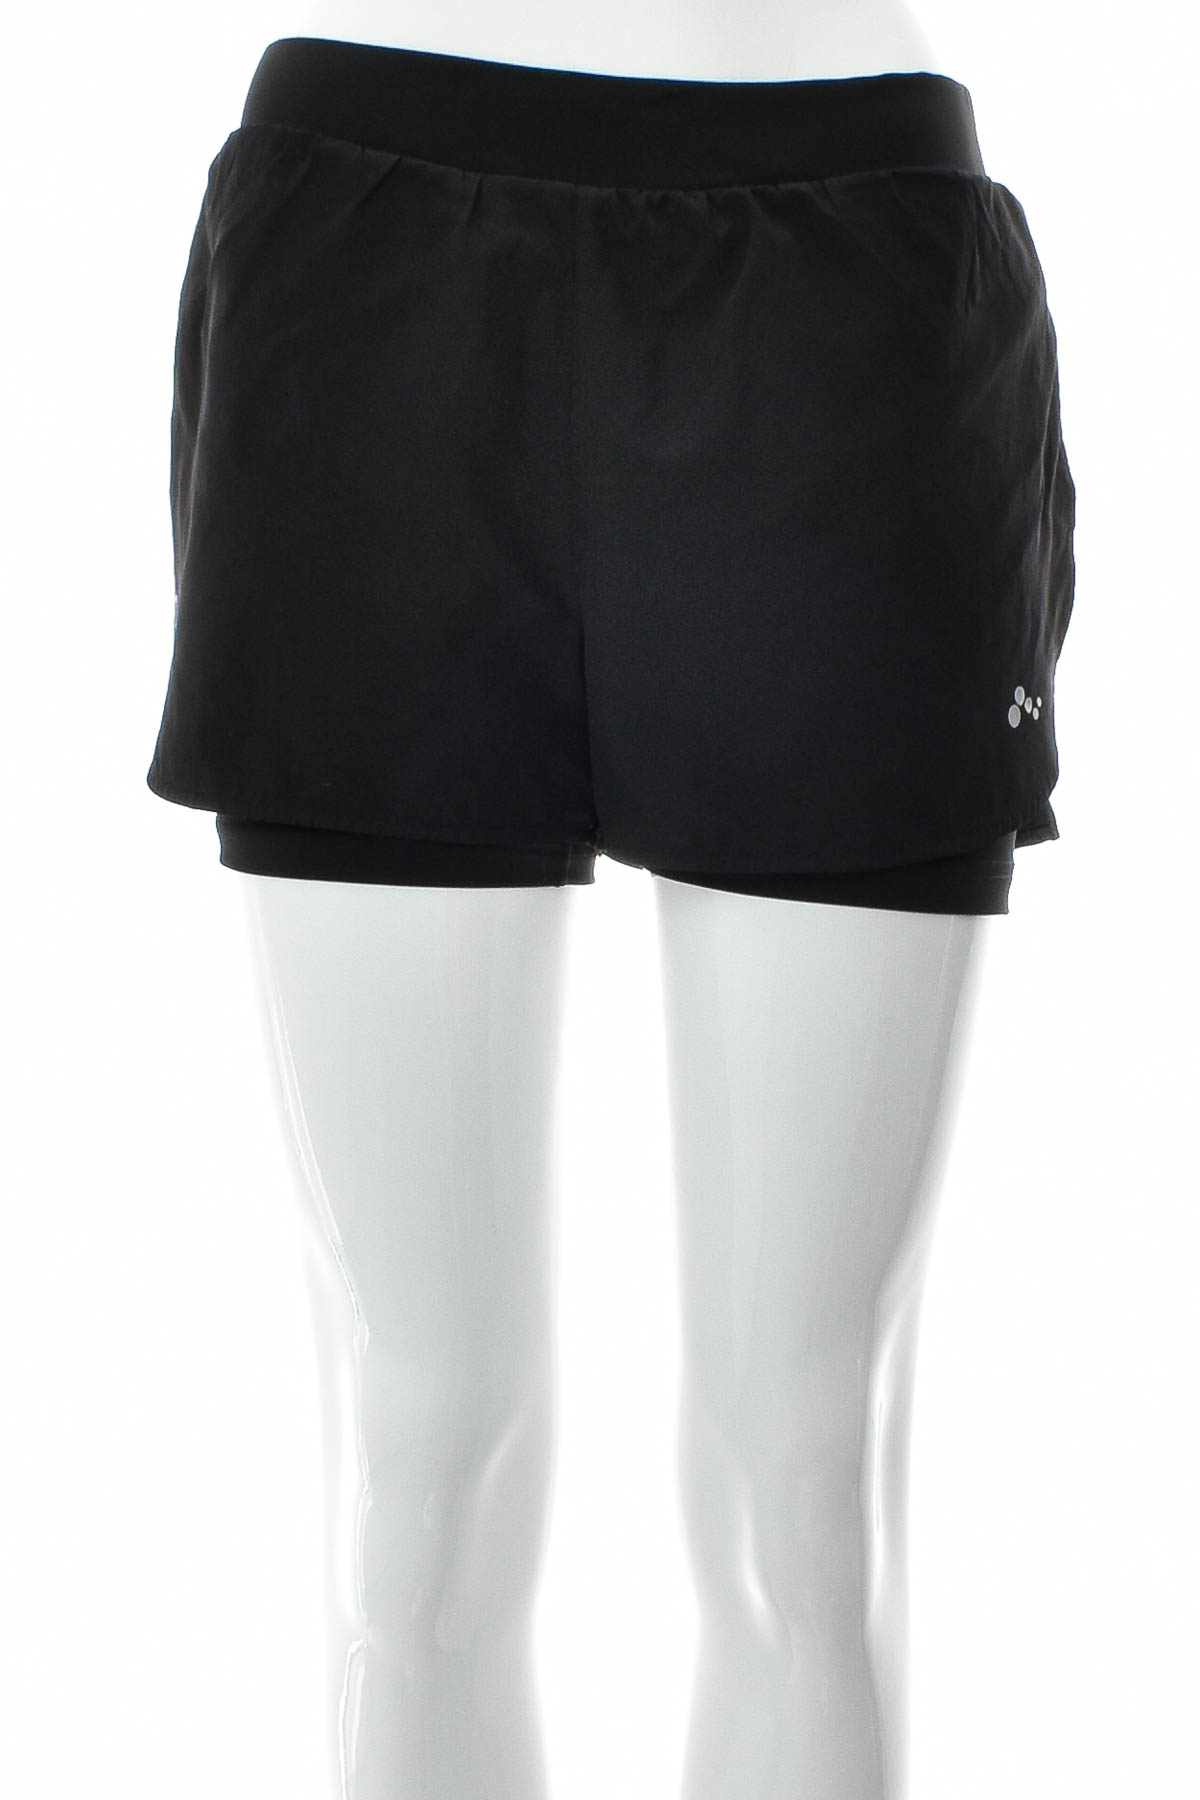 Women's shorts - ONLY PLAY - 0